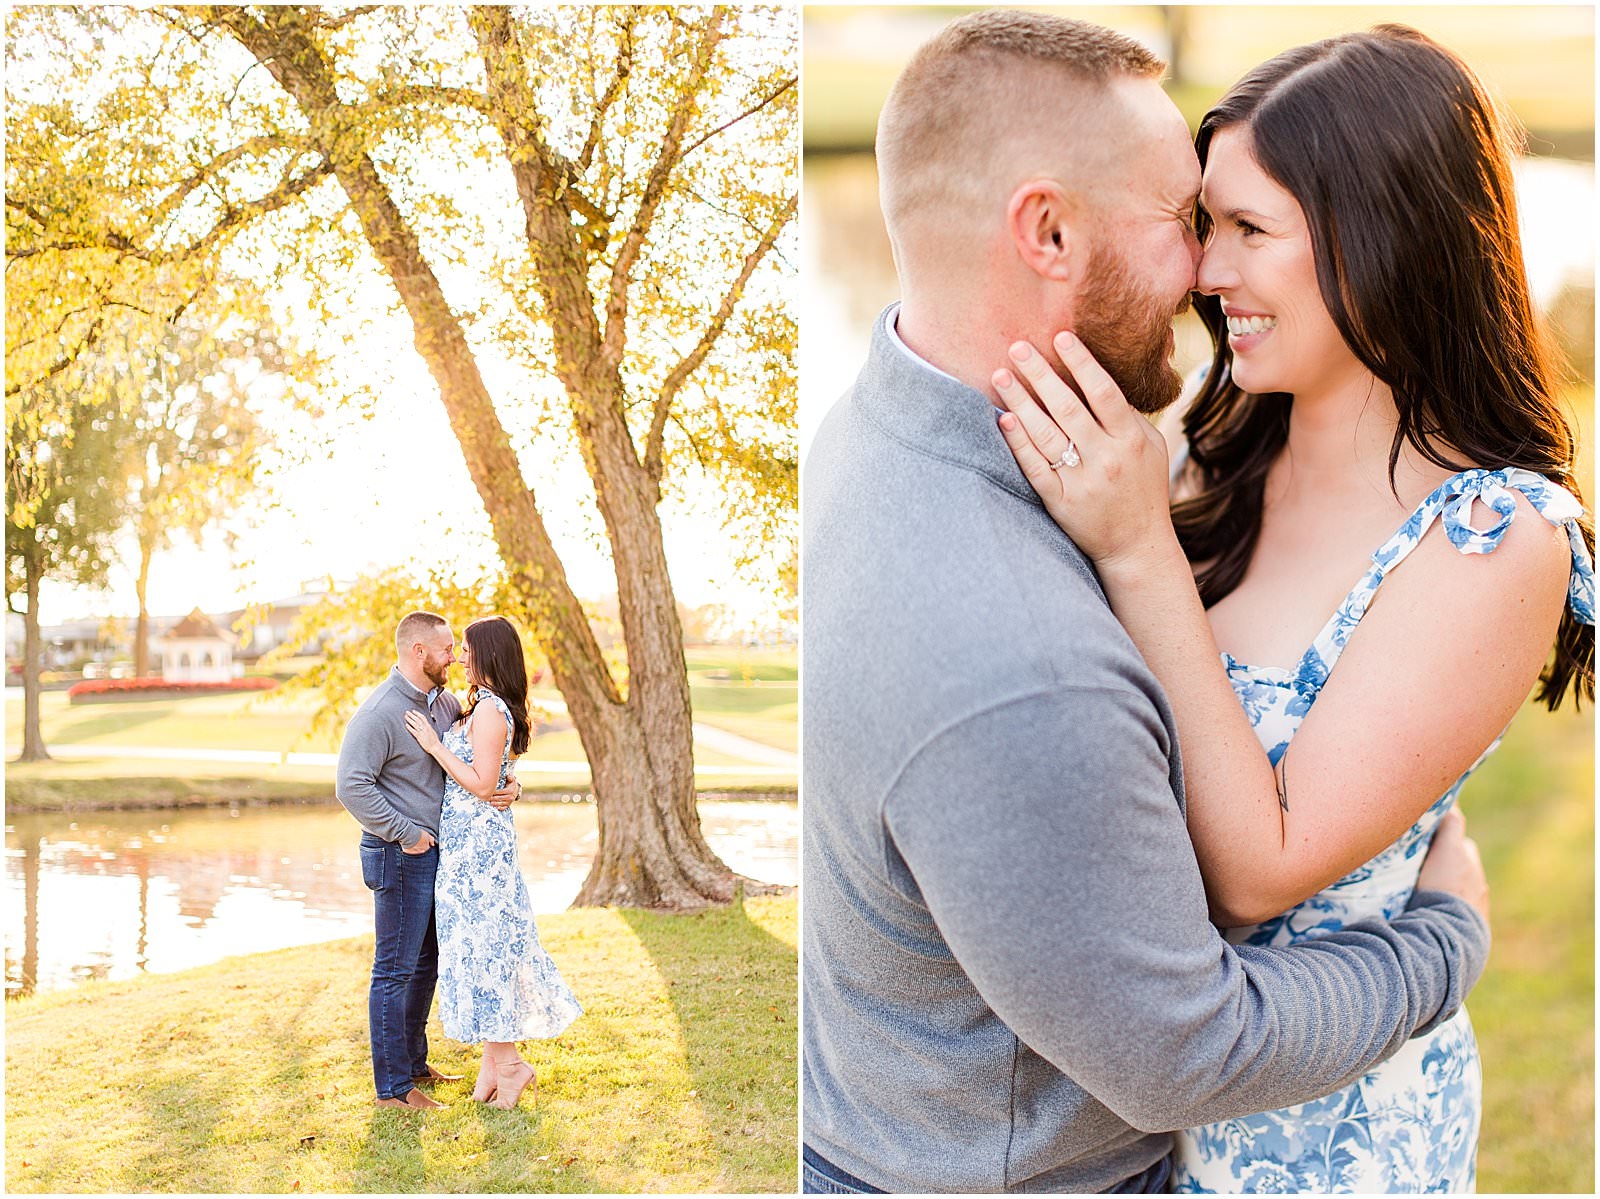 A Rolling Hills Country Club Engagement Session | Meagan and Kyle | Bret and Brandie Photography 0037.jpg